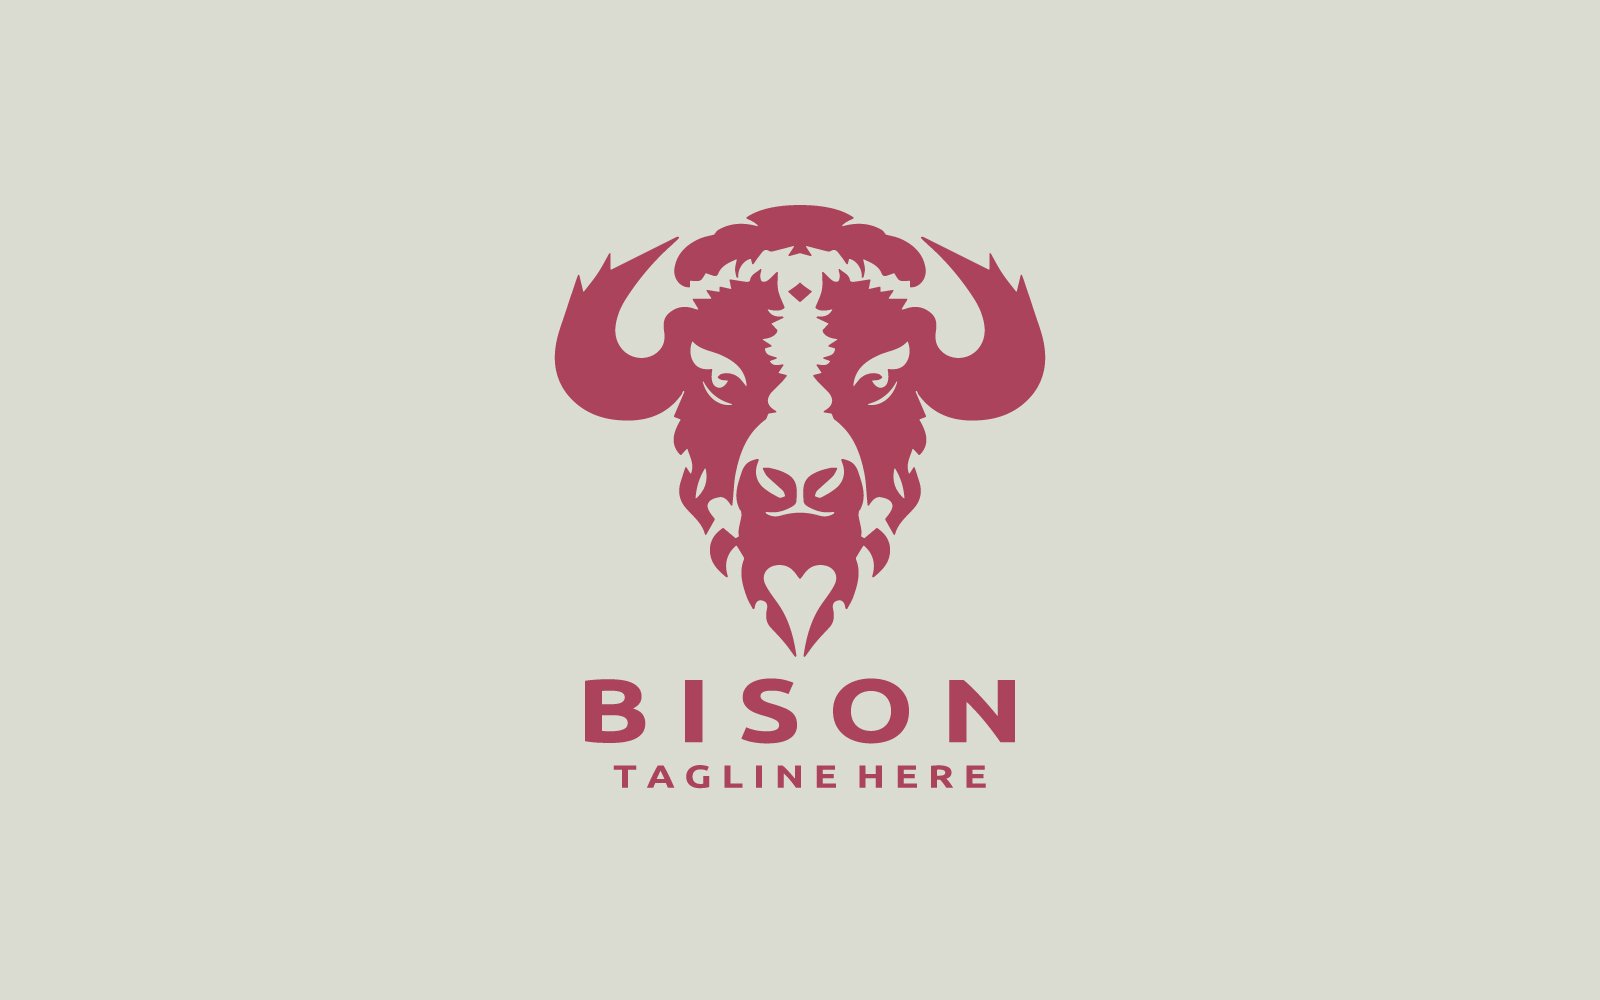 Template #381890 Logo Bison Webdesign Template - Logo template Preview